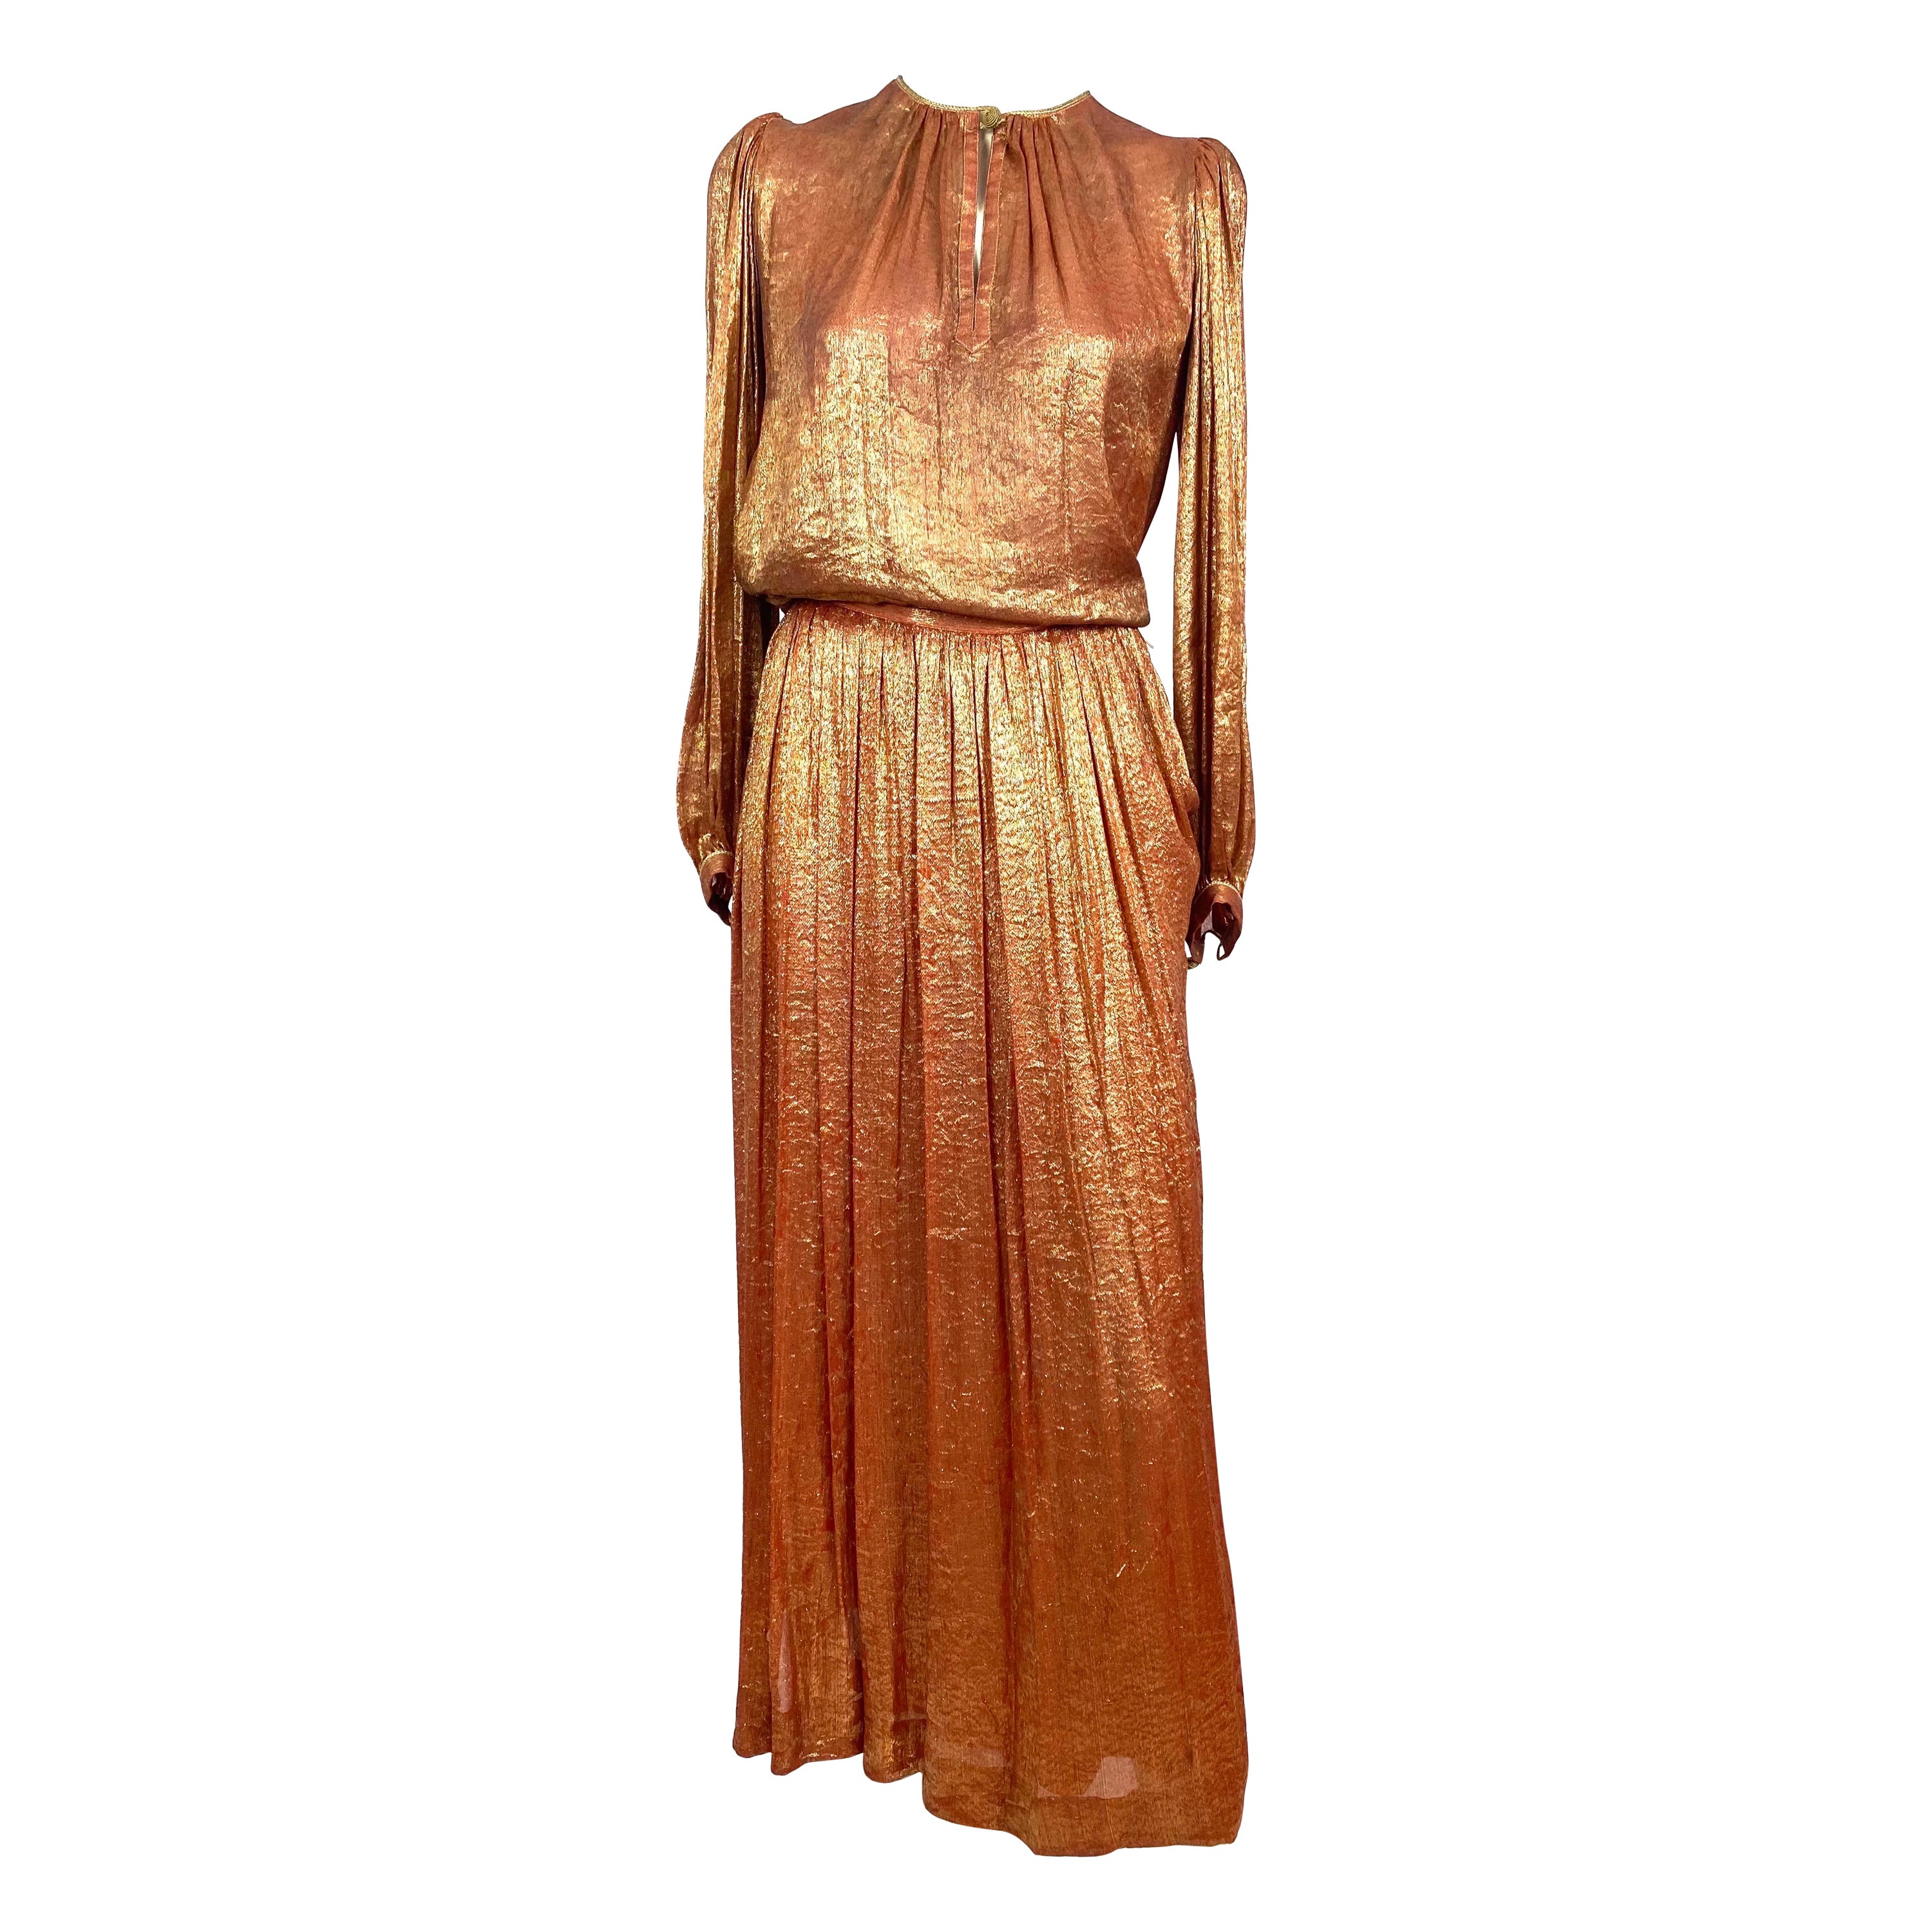 Vintage set from the 1970s by Yves Saint Laurent in gold and bronze silk lamé